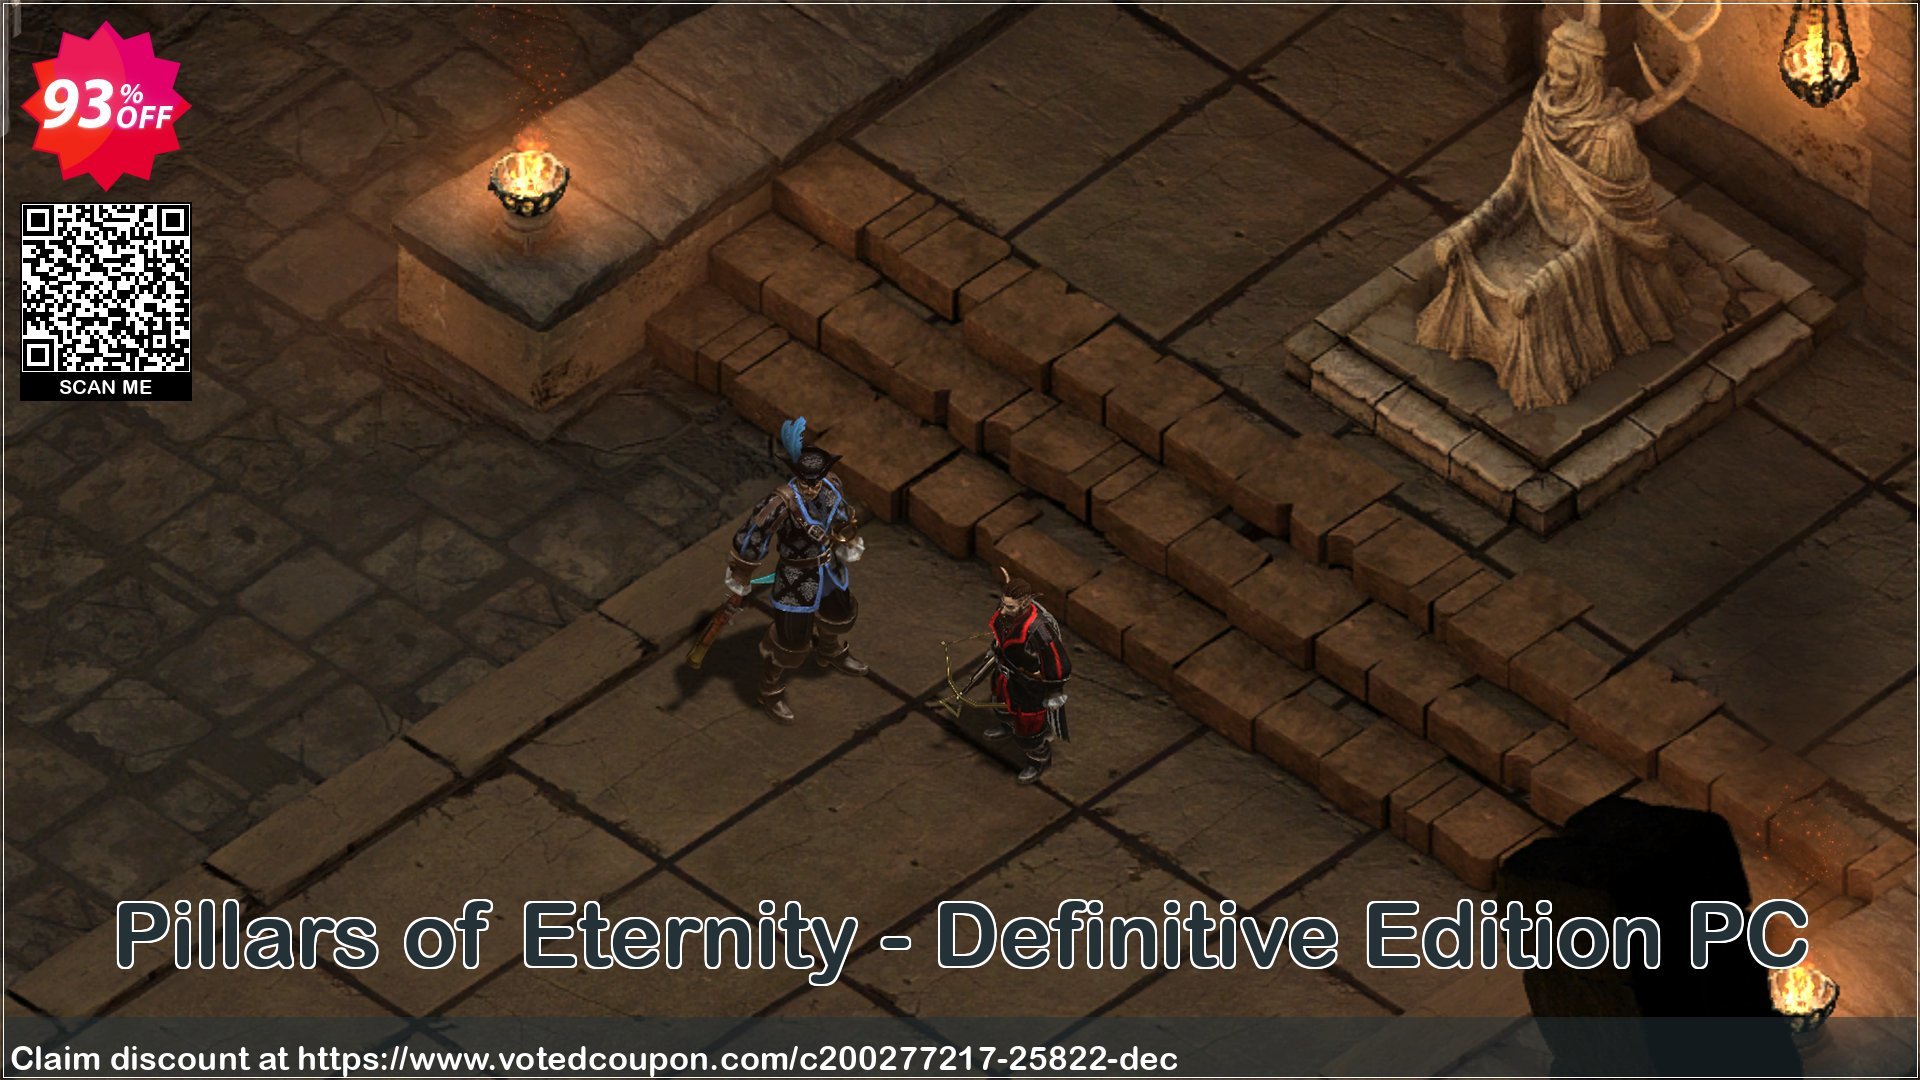 Pillars of Eternity - Definitive Edition PC Coupon Code Apr 2024, 93% OFF - VotedCoupon